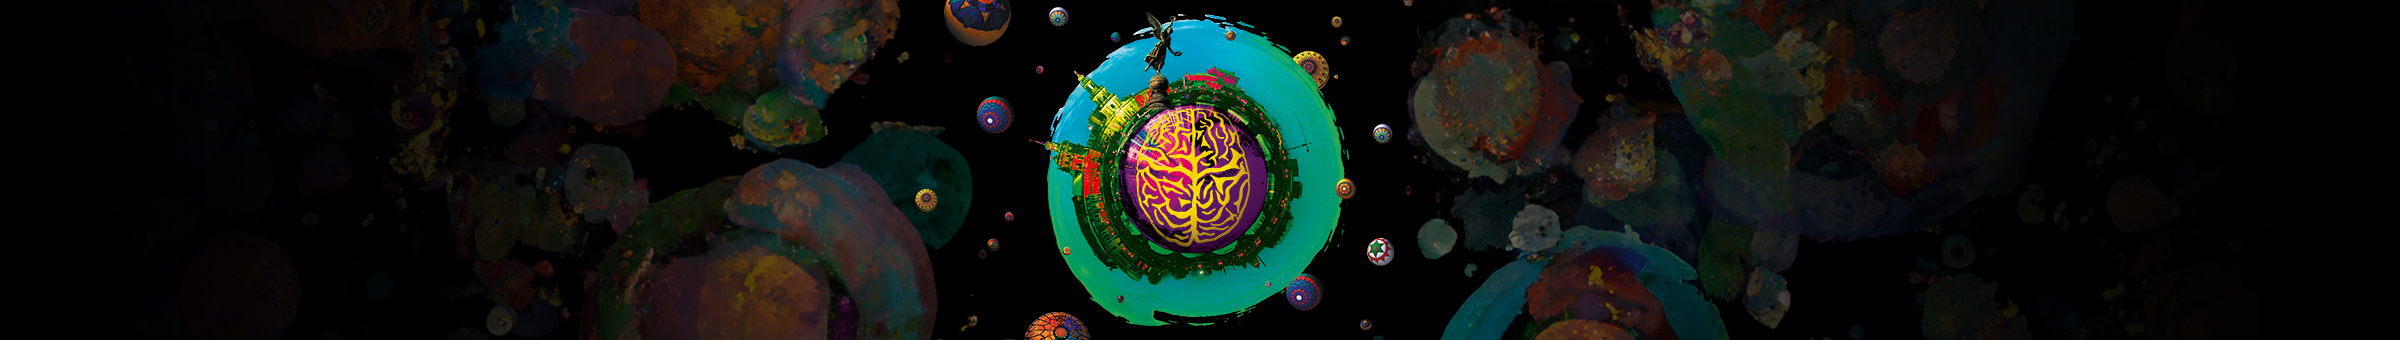 Artistic, colourful depiction of the Dresden silhouette with a stylised brain in the centre